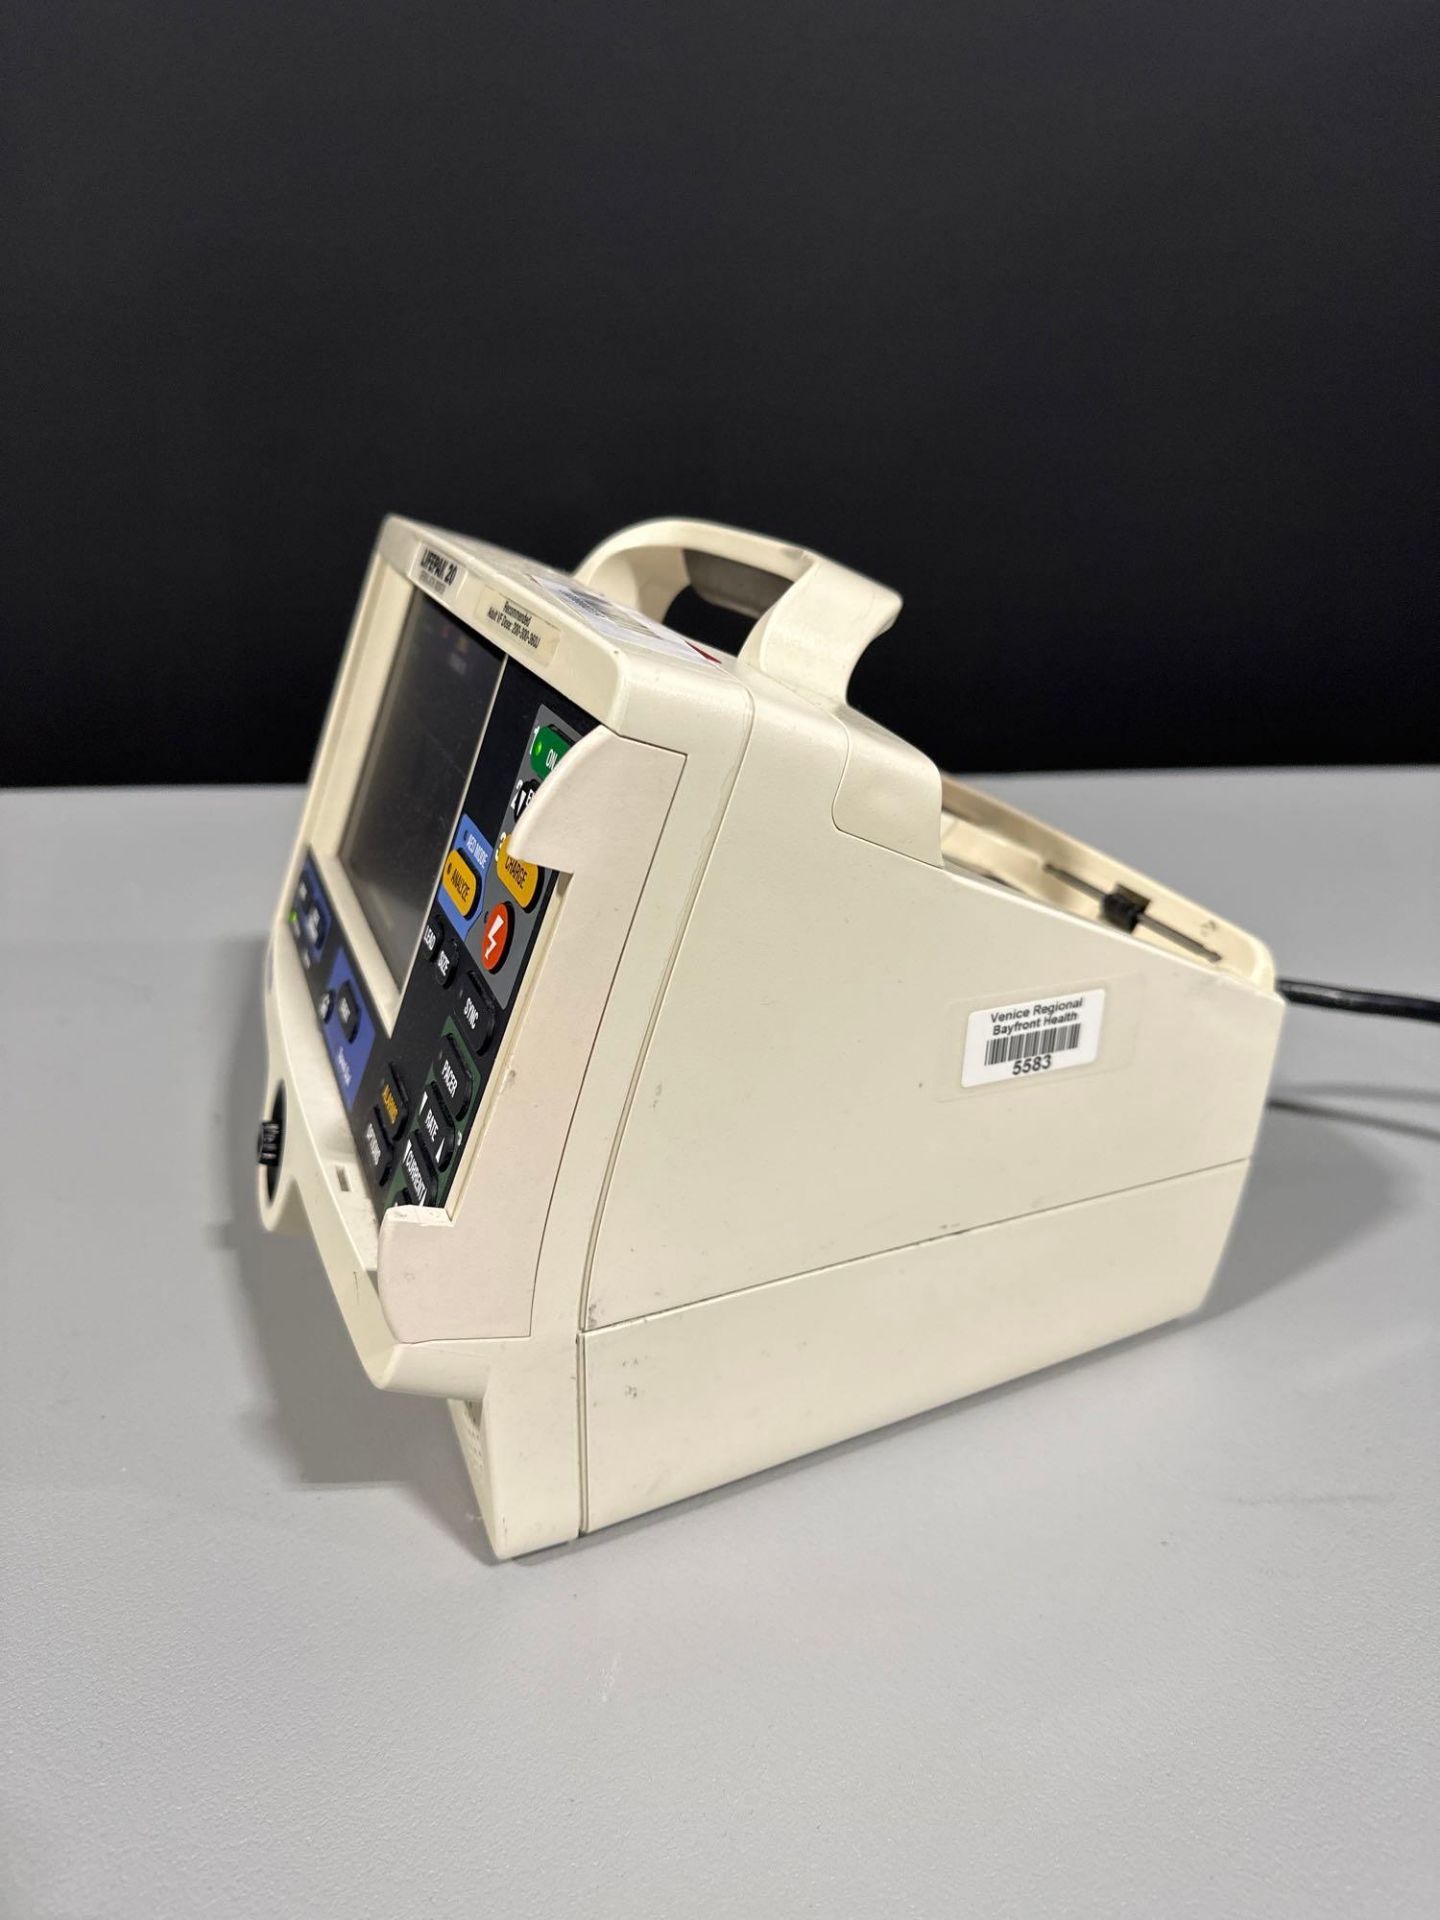 MEDTRONIC/PHYSIO CONTROL LIFEPAK 20 DEFIB WITH PACING, 3 LEAD ECG, ANALYZE (AED MODE) - Image 3 of 8